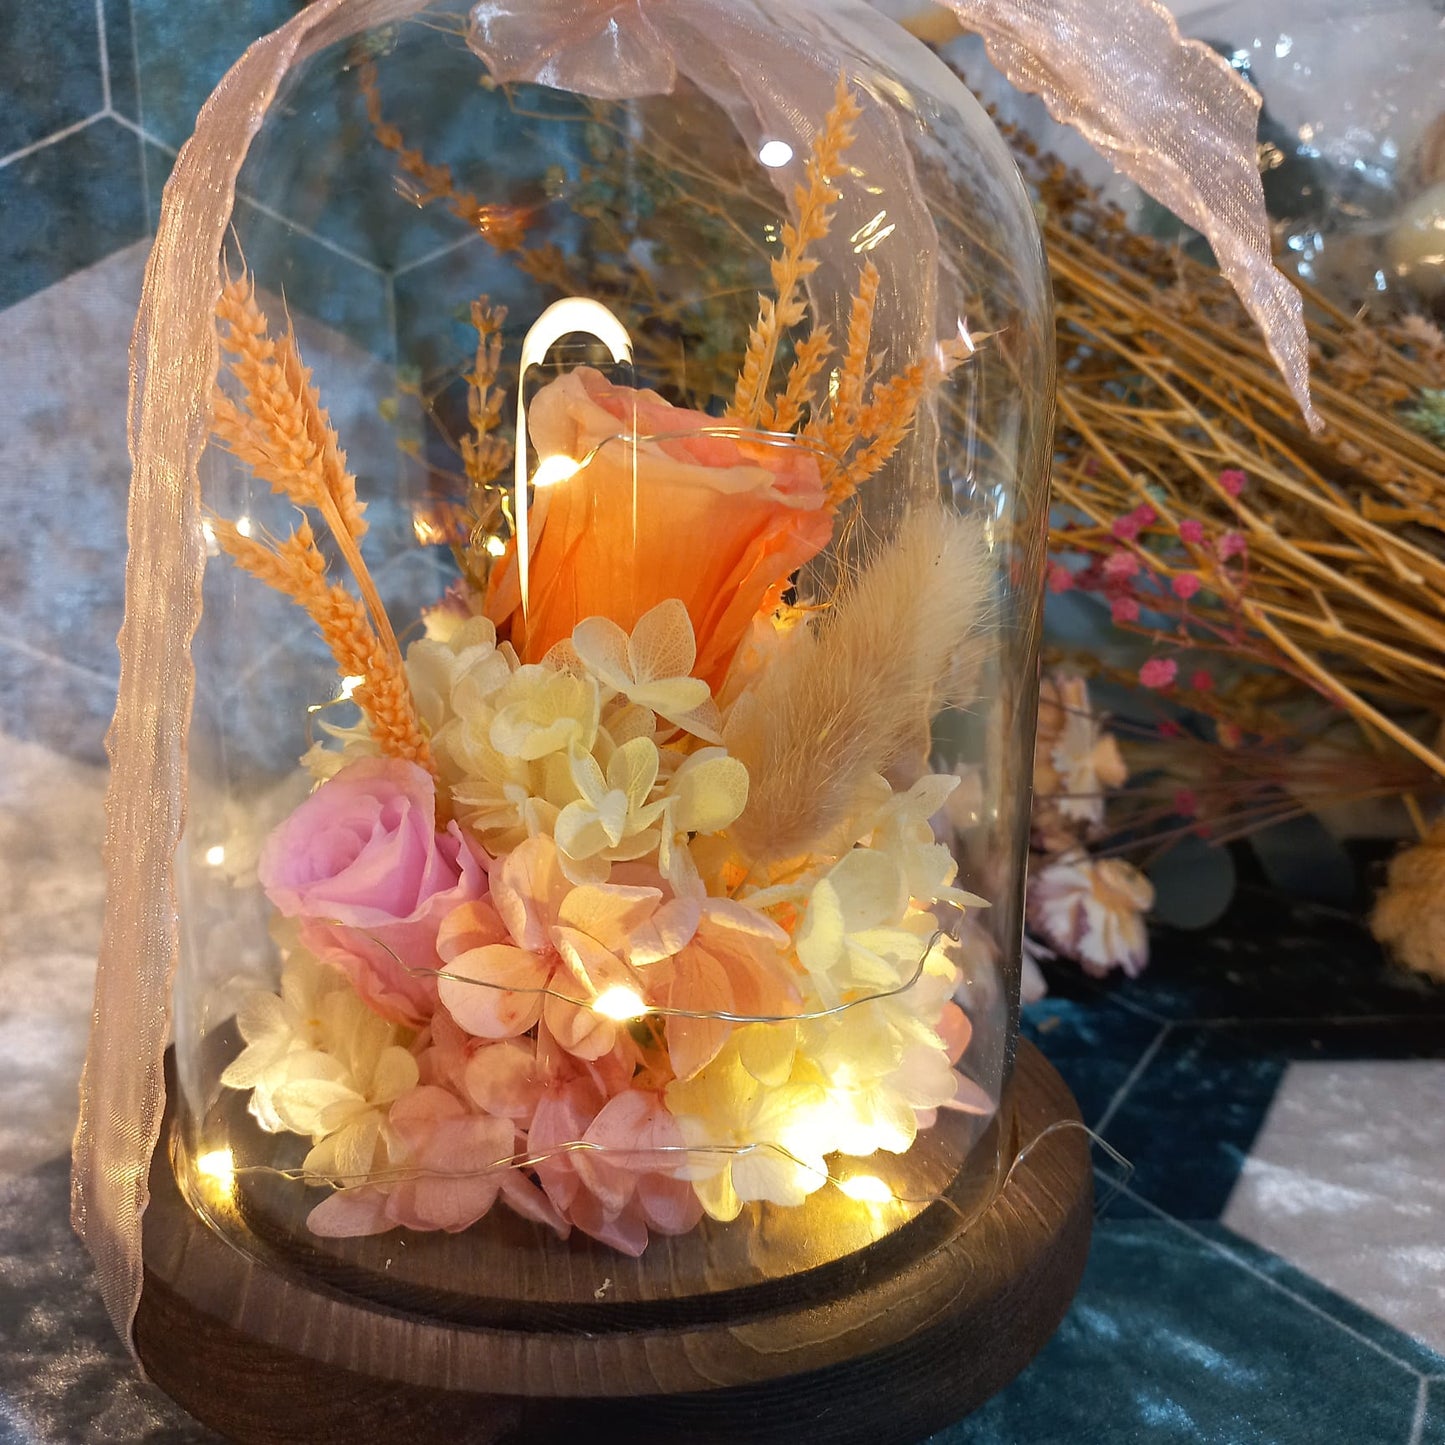 "Only You" Bespoke Preserved Floral Dome